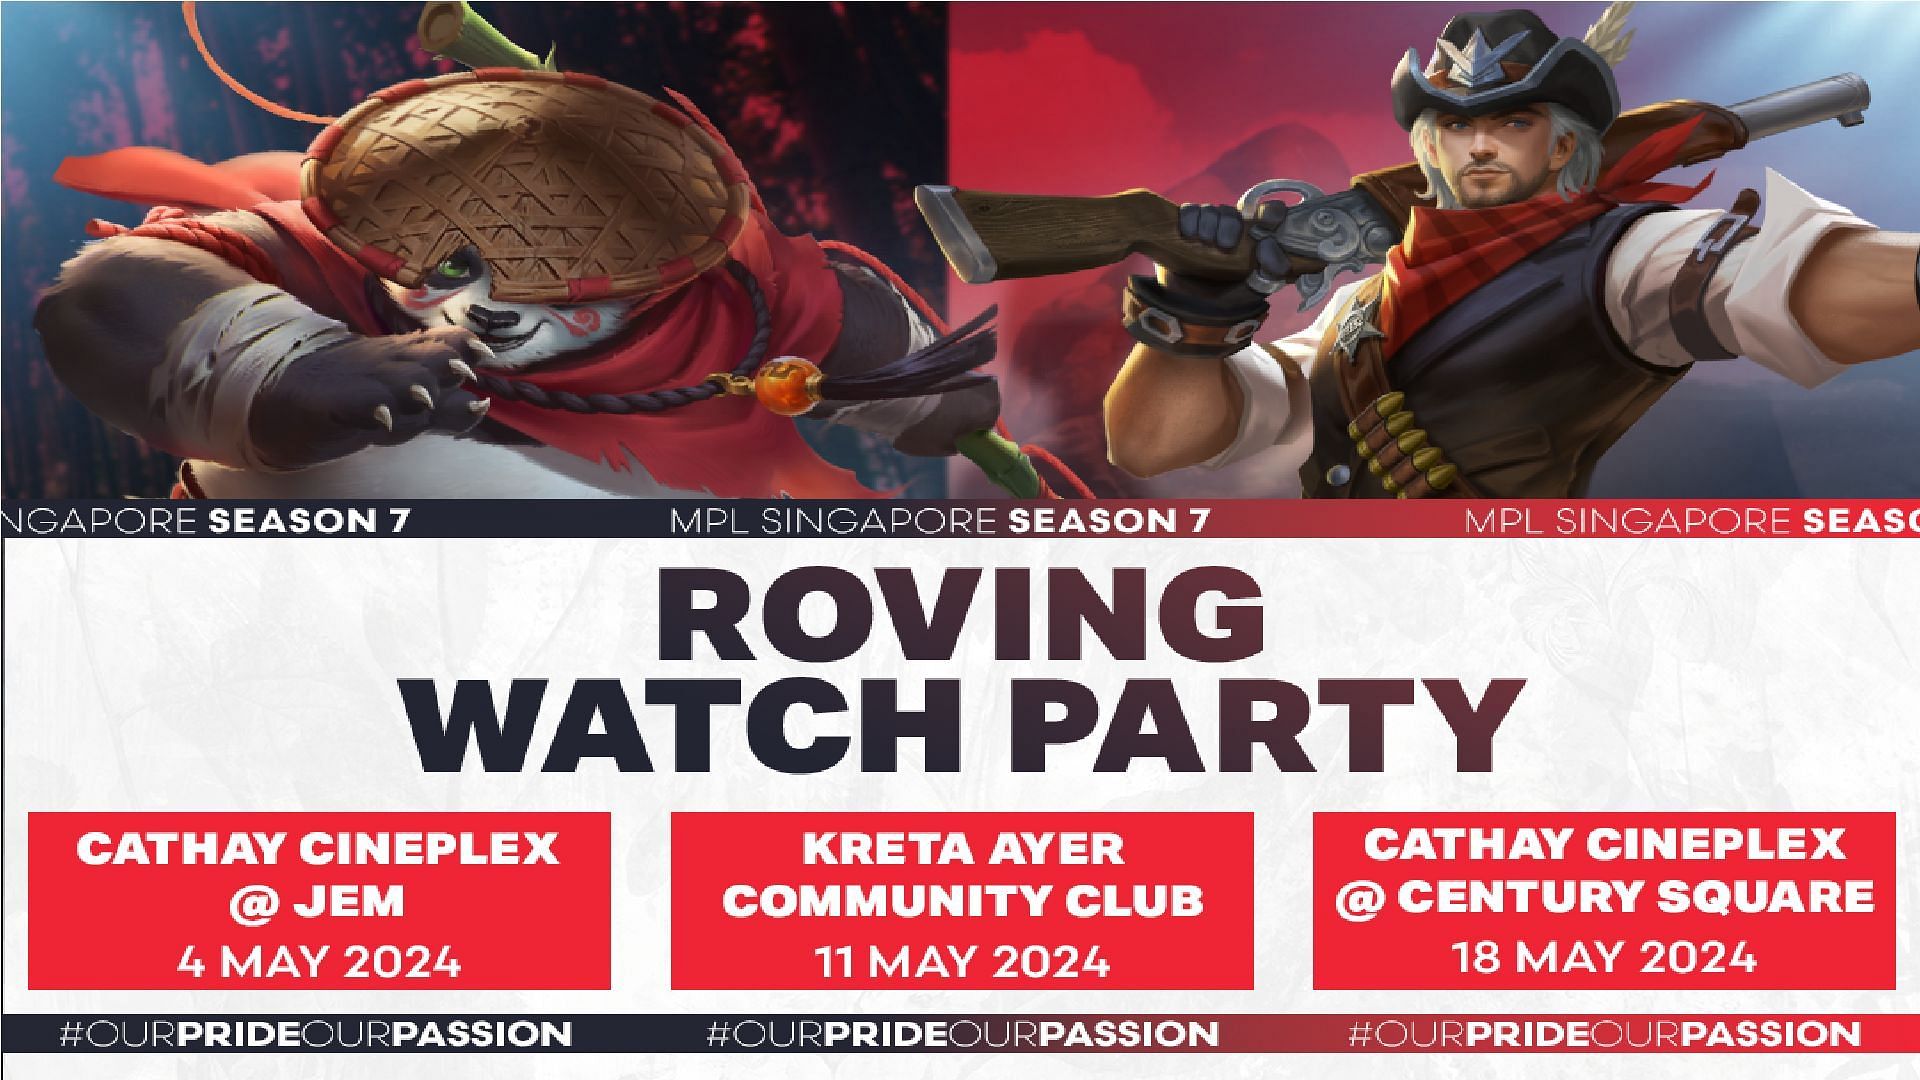 MPL Singapore Season 7 to organize different watch parties to open esports viewing opportunities to a wider range audience (Image via Moonton Games)